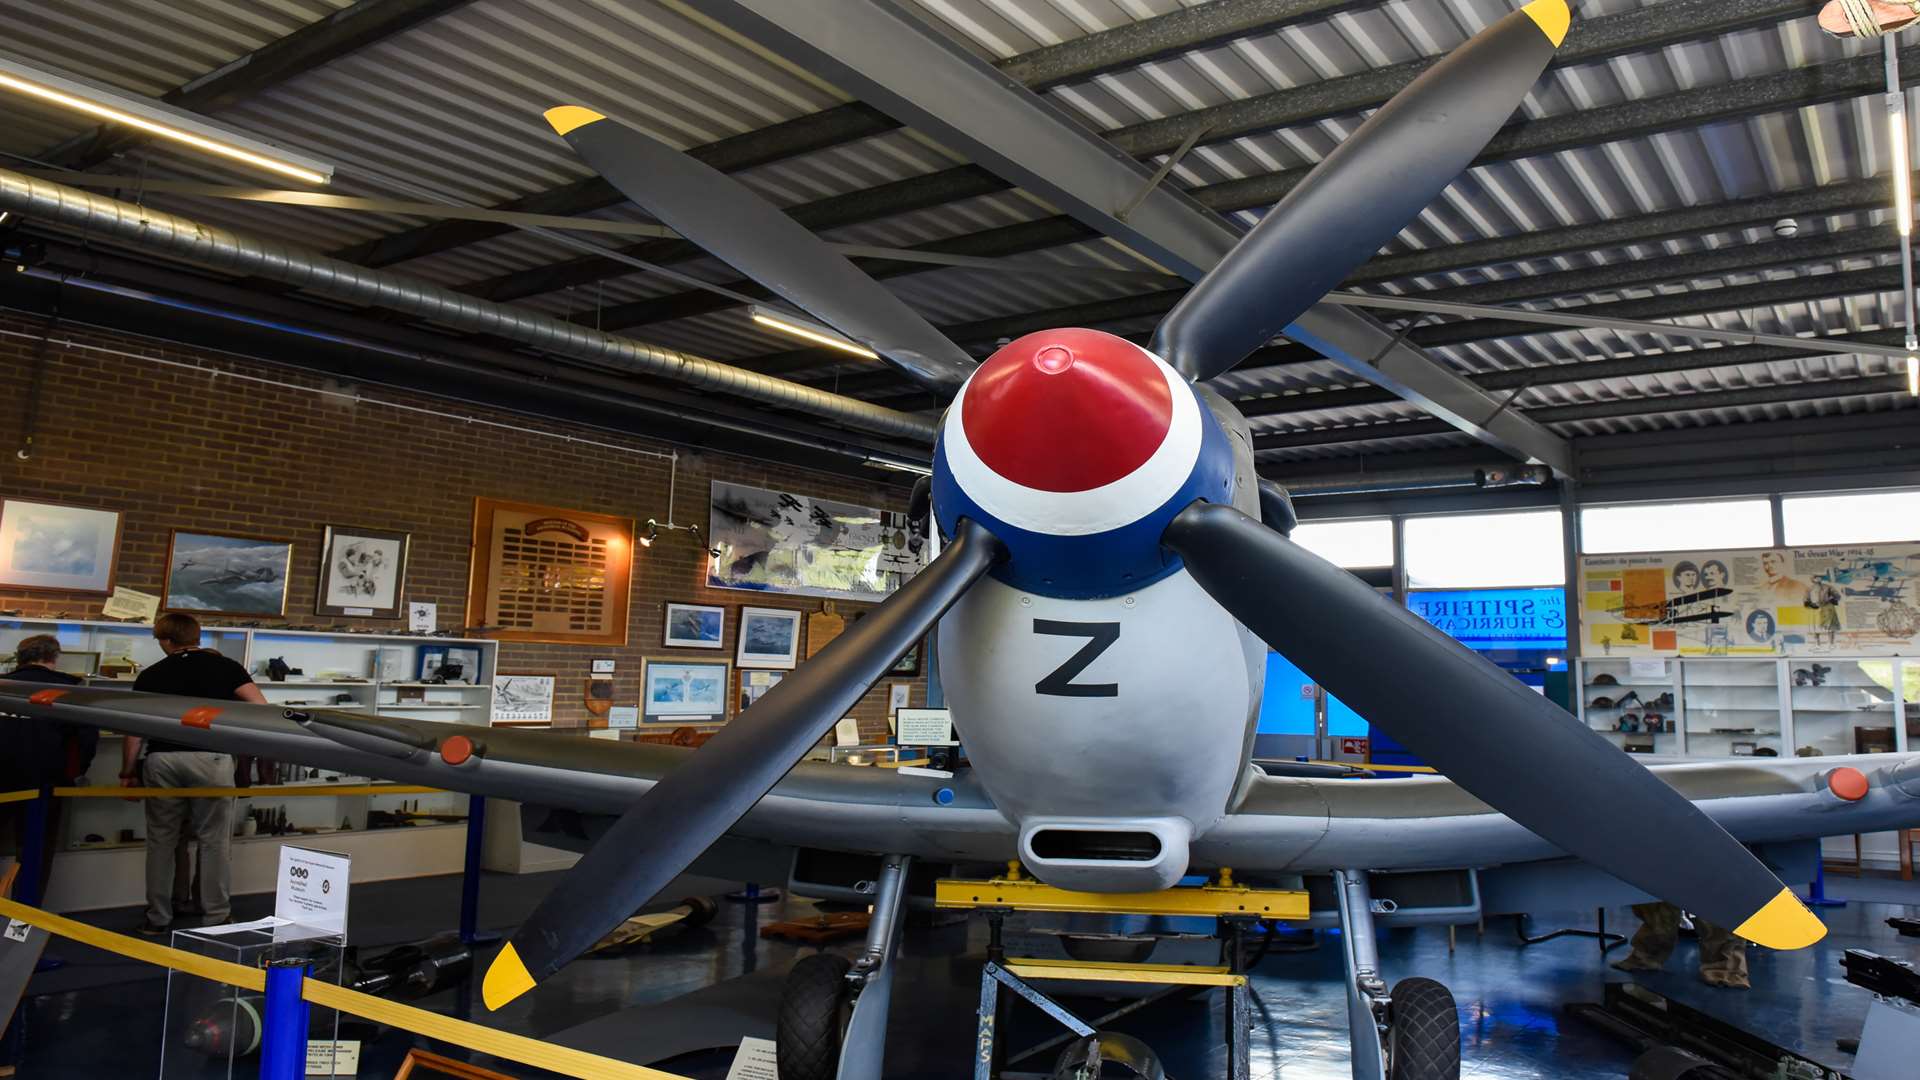 The museum at Manston